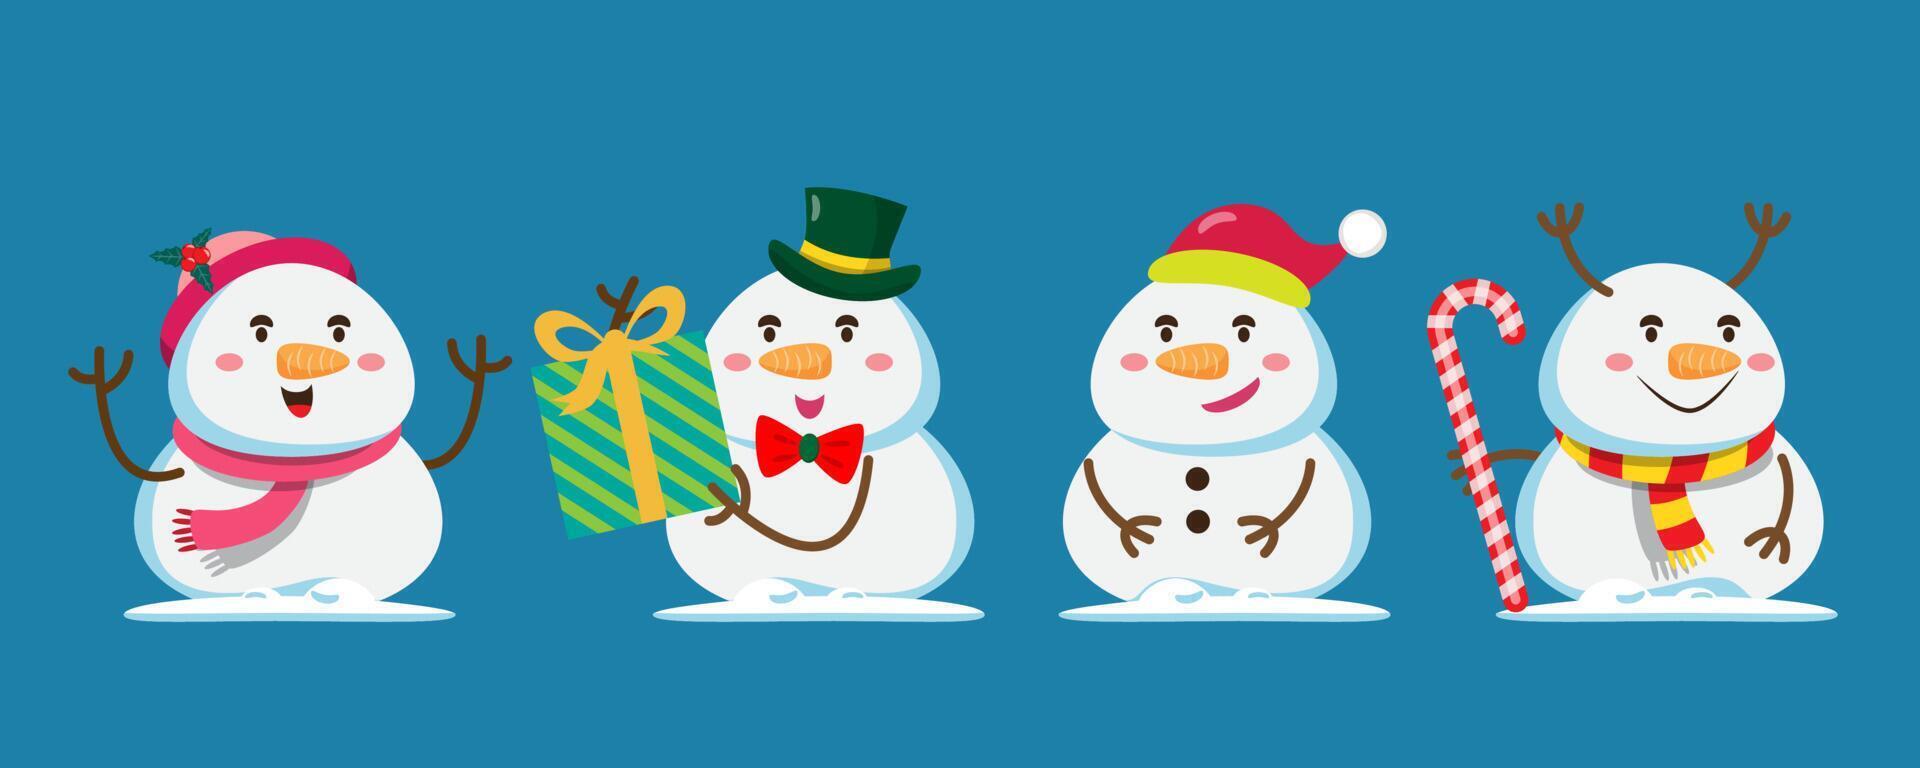 snowman in different activity design element for invitation card, party, New Year's, Christmas, parties. vector